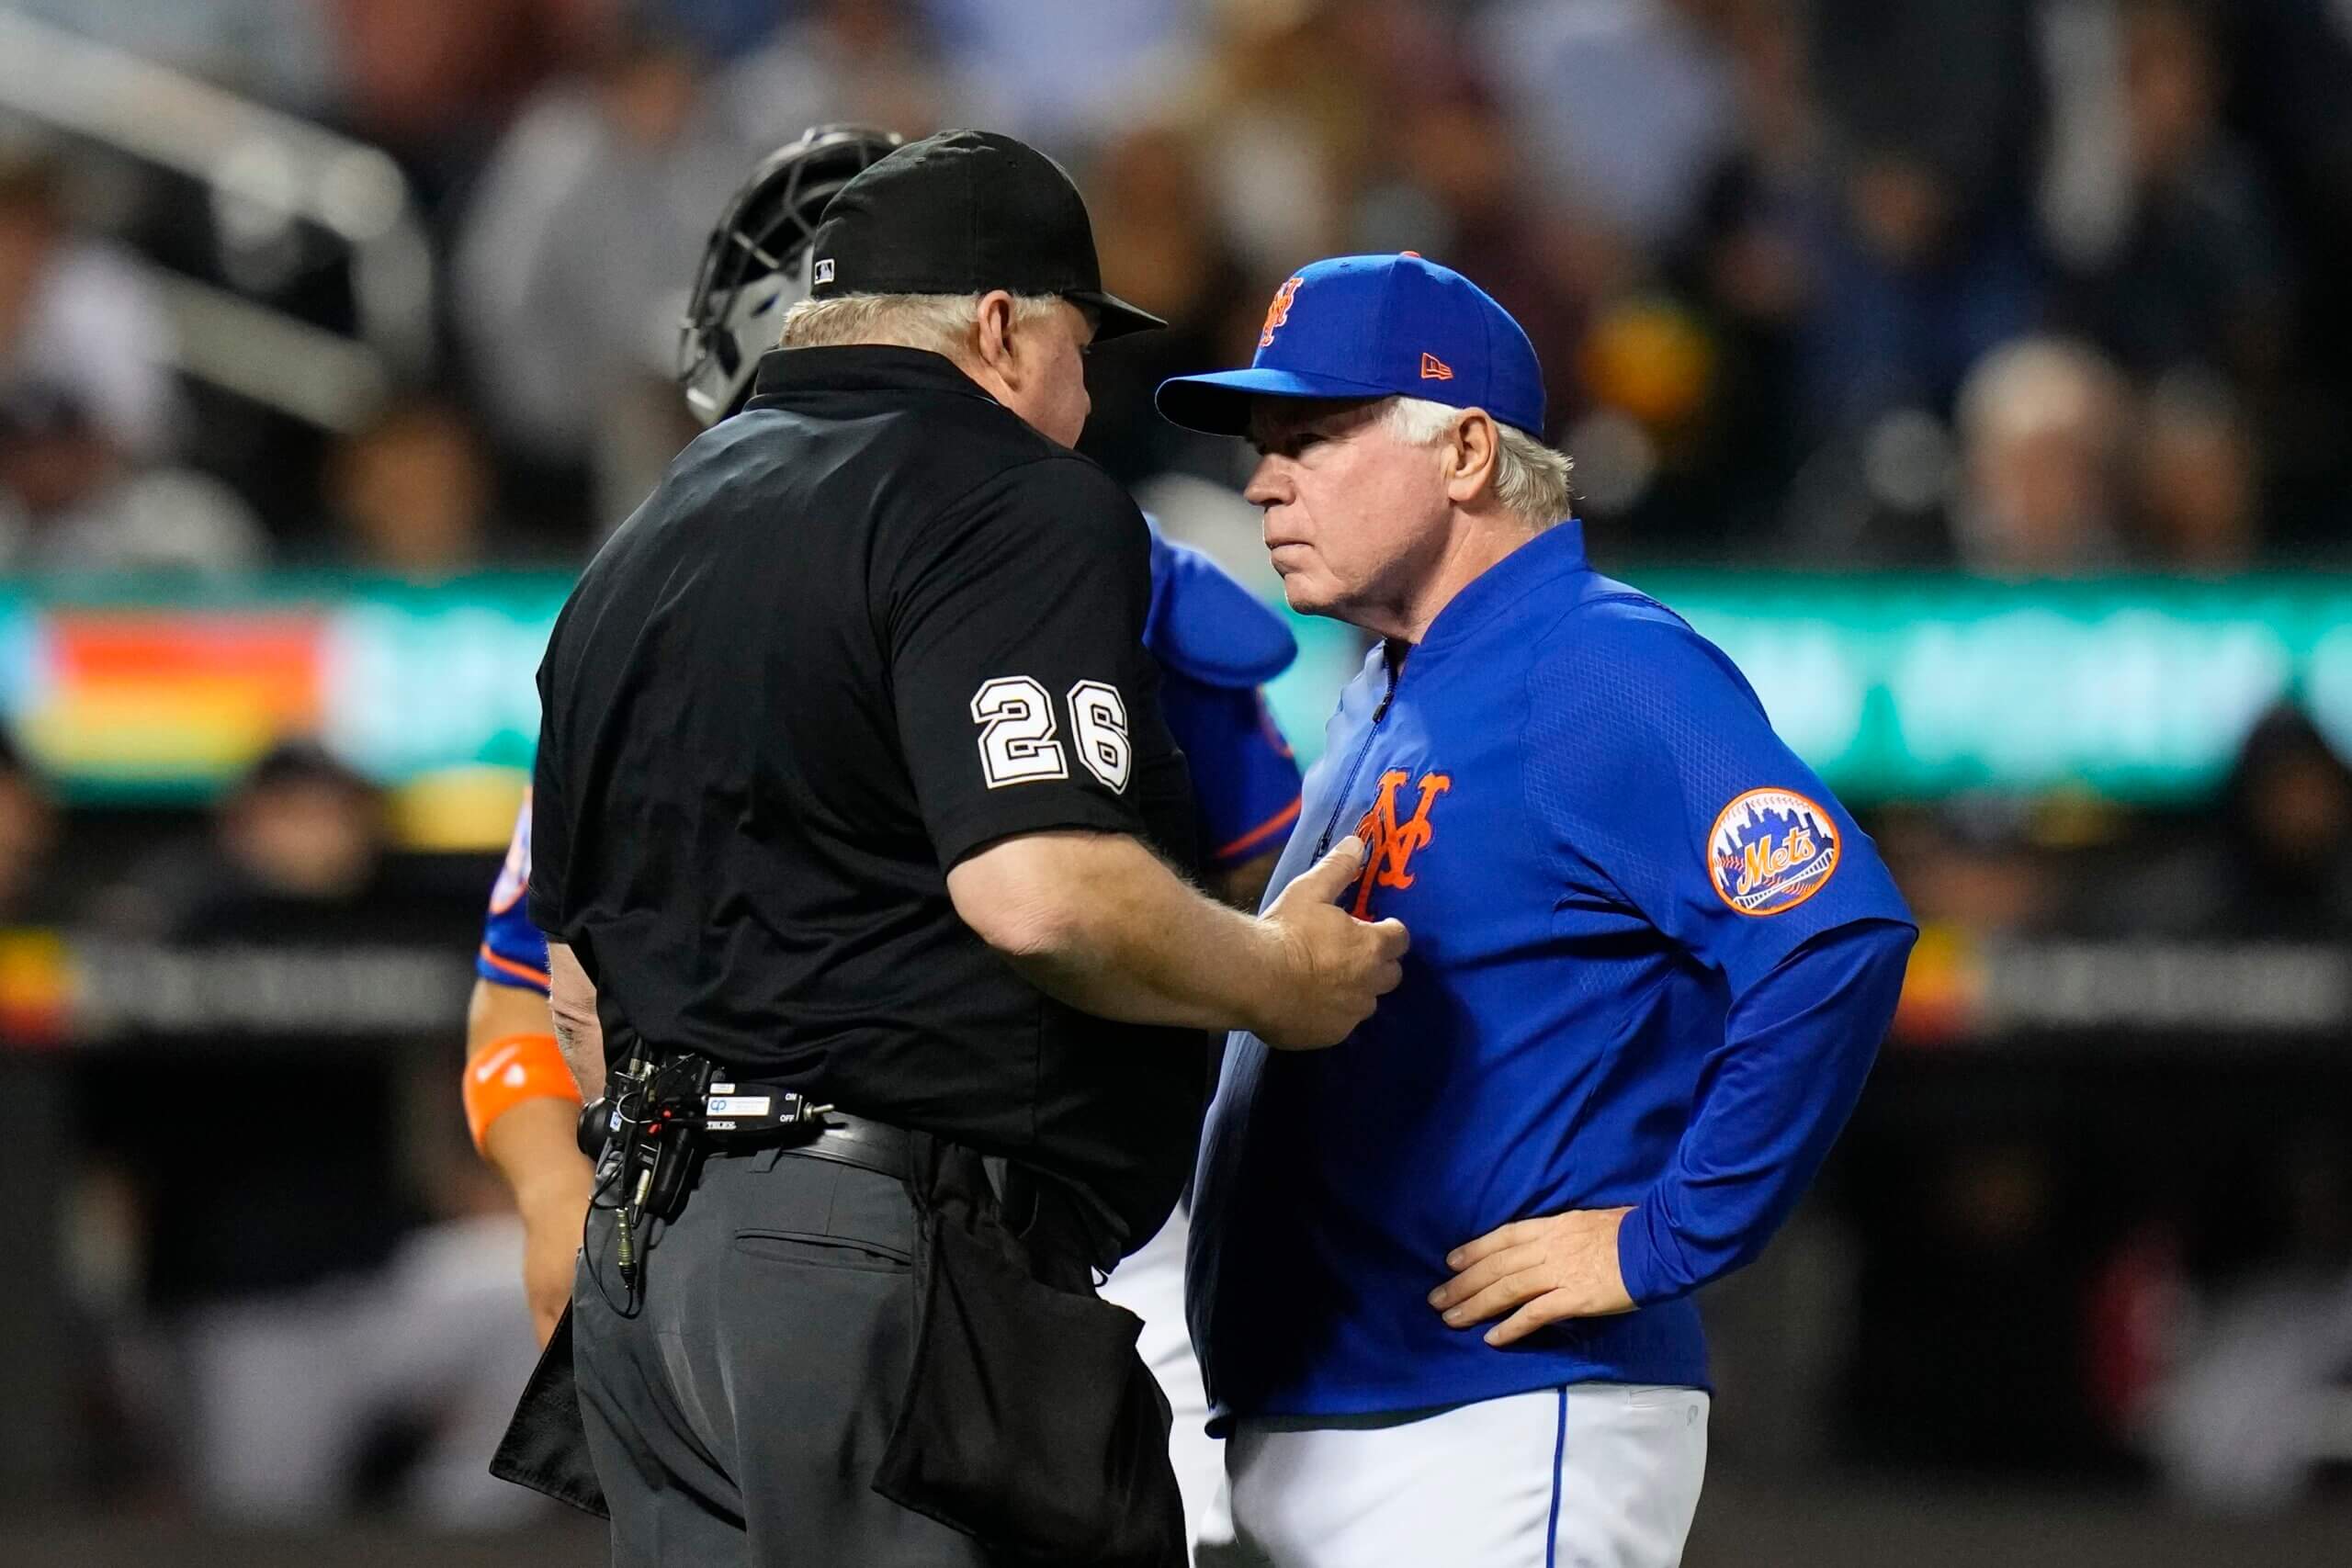 Mets reliever Drew Smith ejected after umpire hand check vs. Yankees